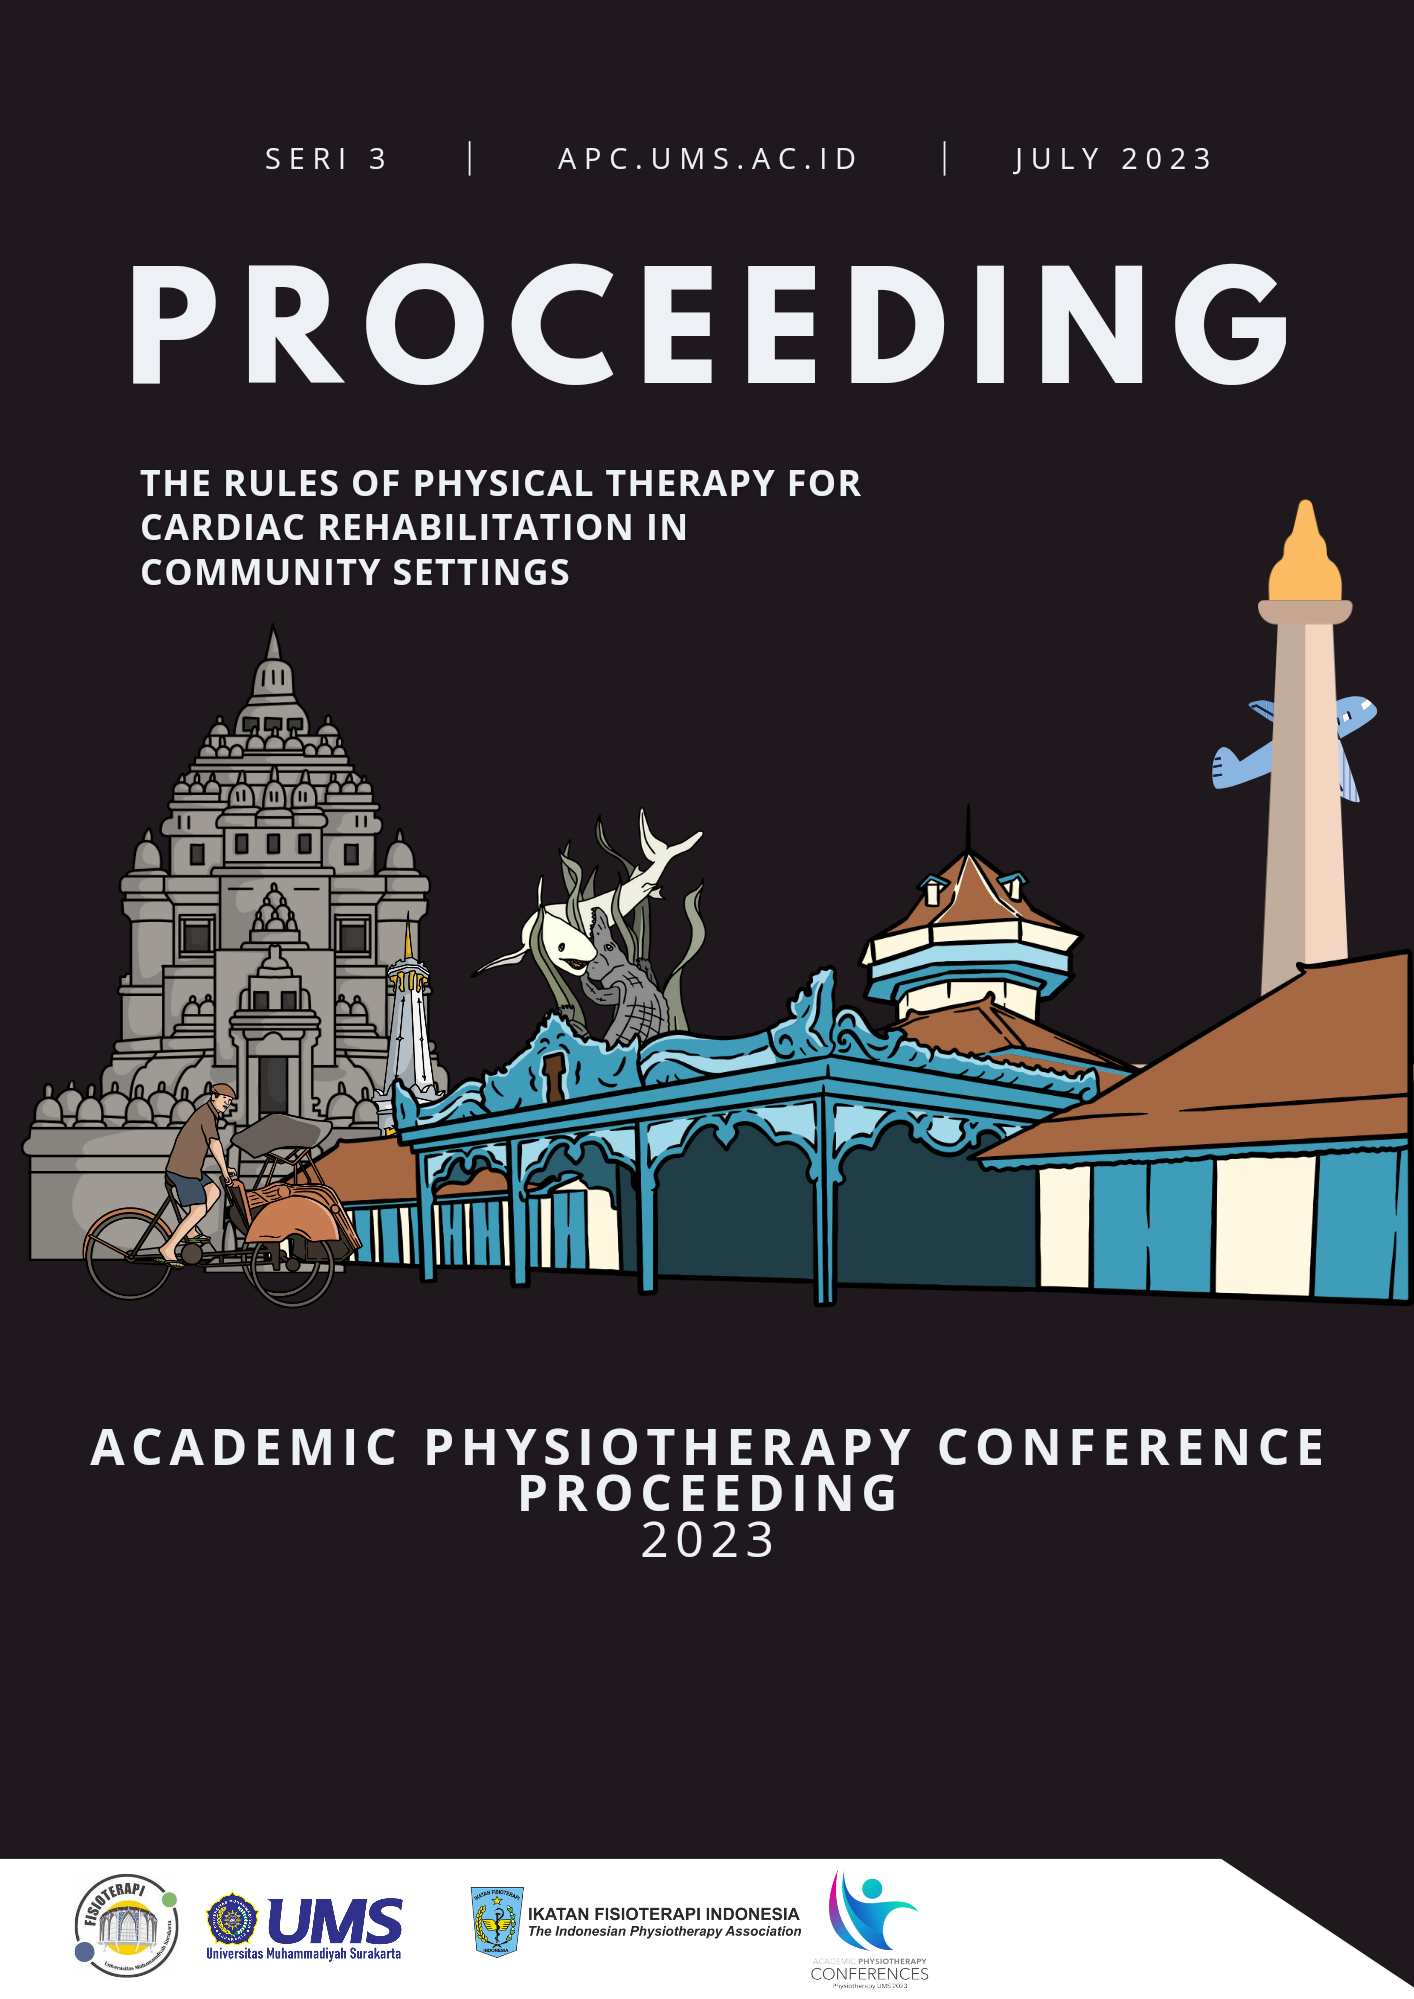 					View 2023: Academic Physiotherapy Conference Proceeding
				